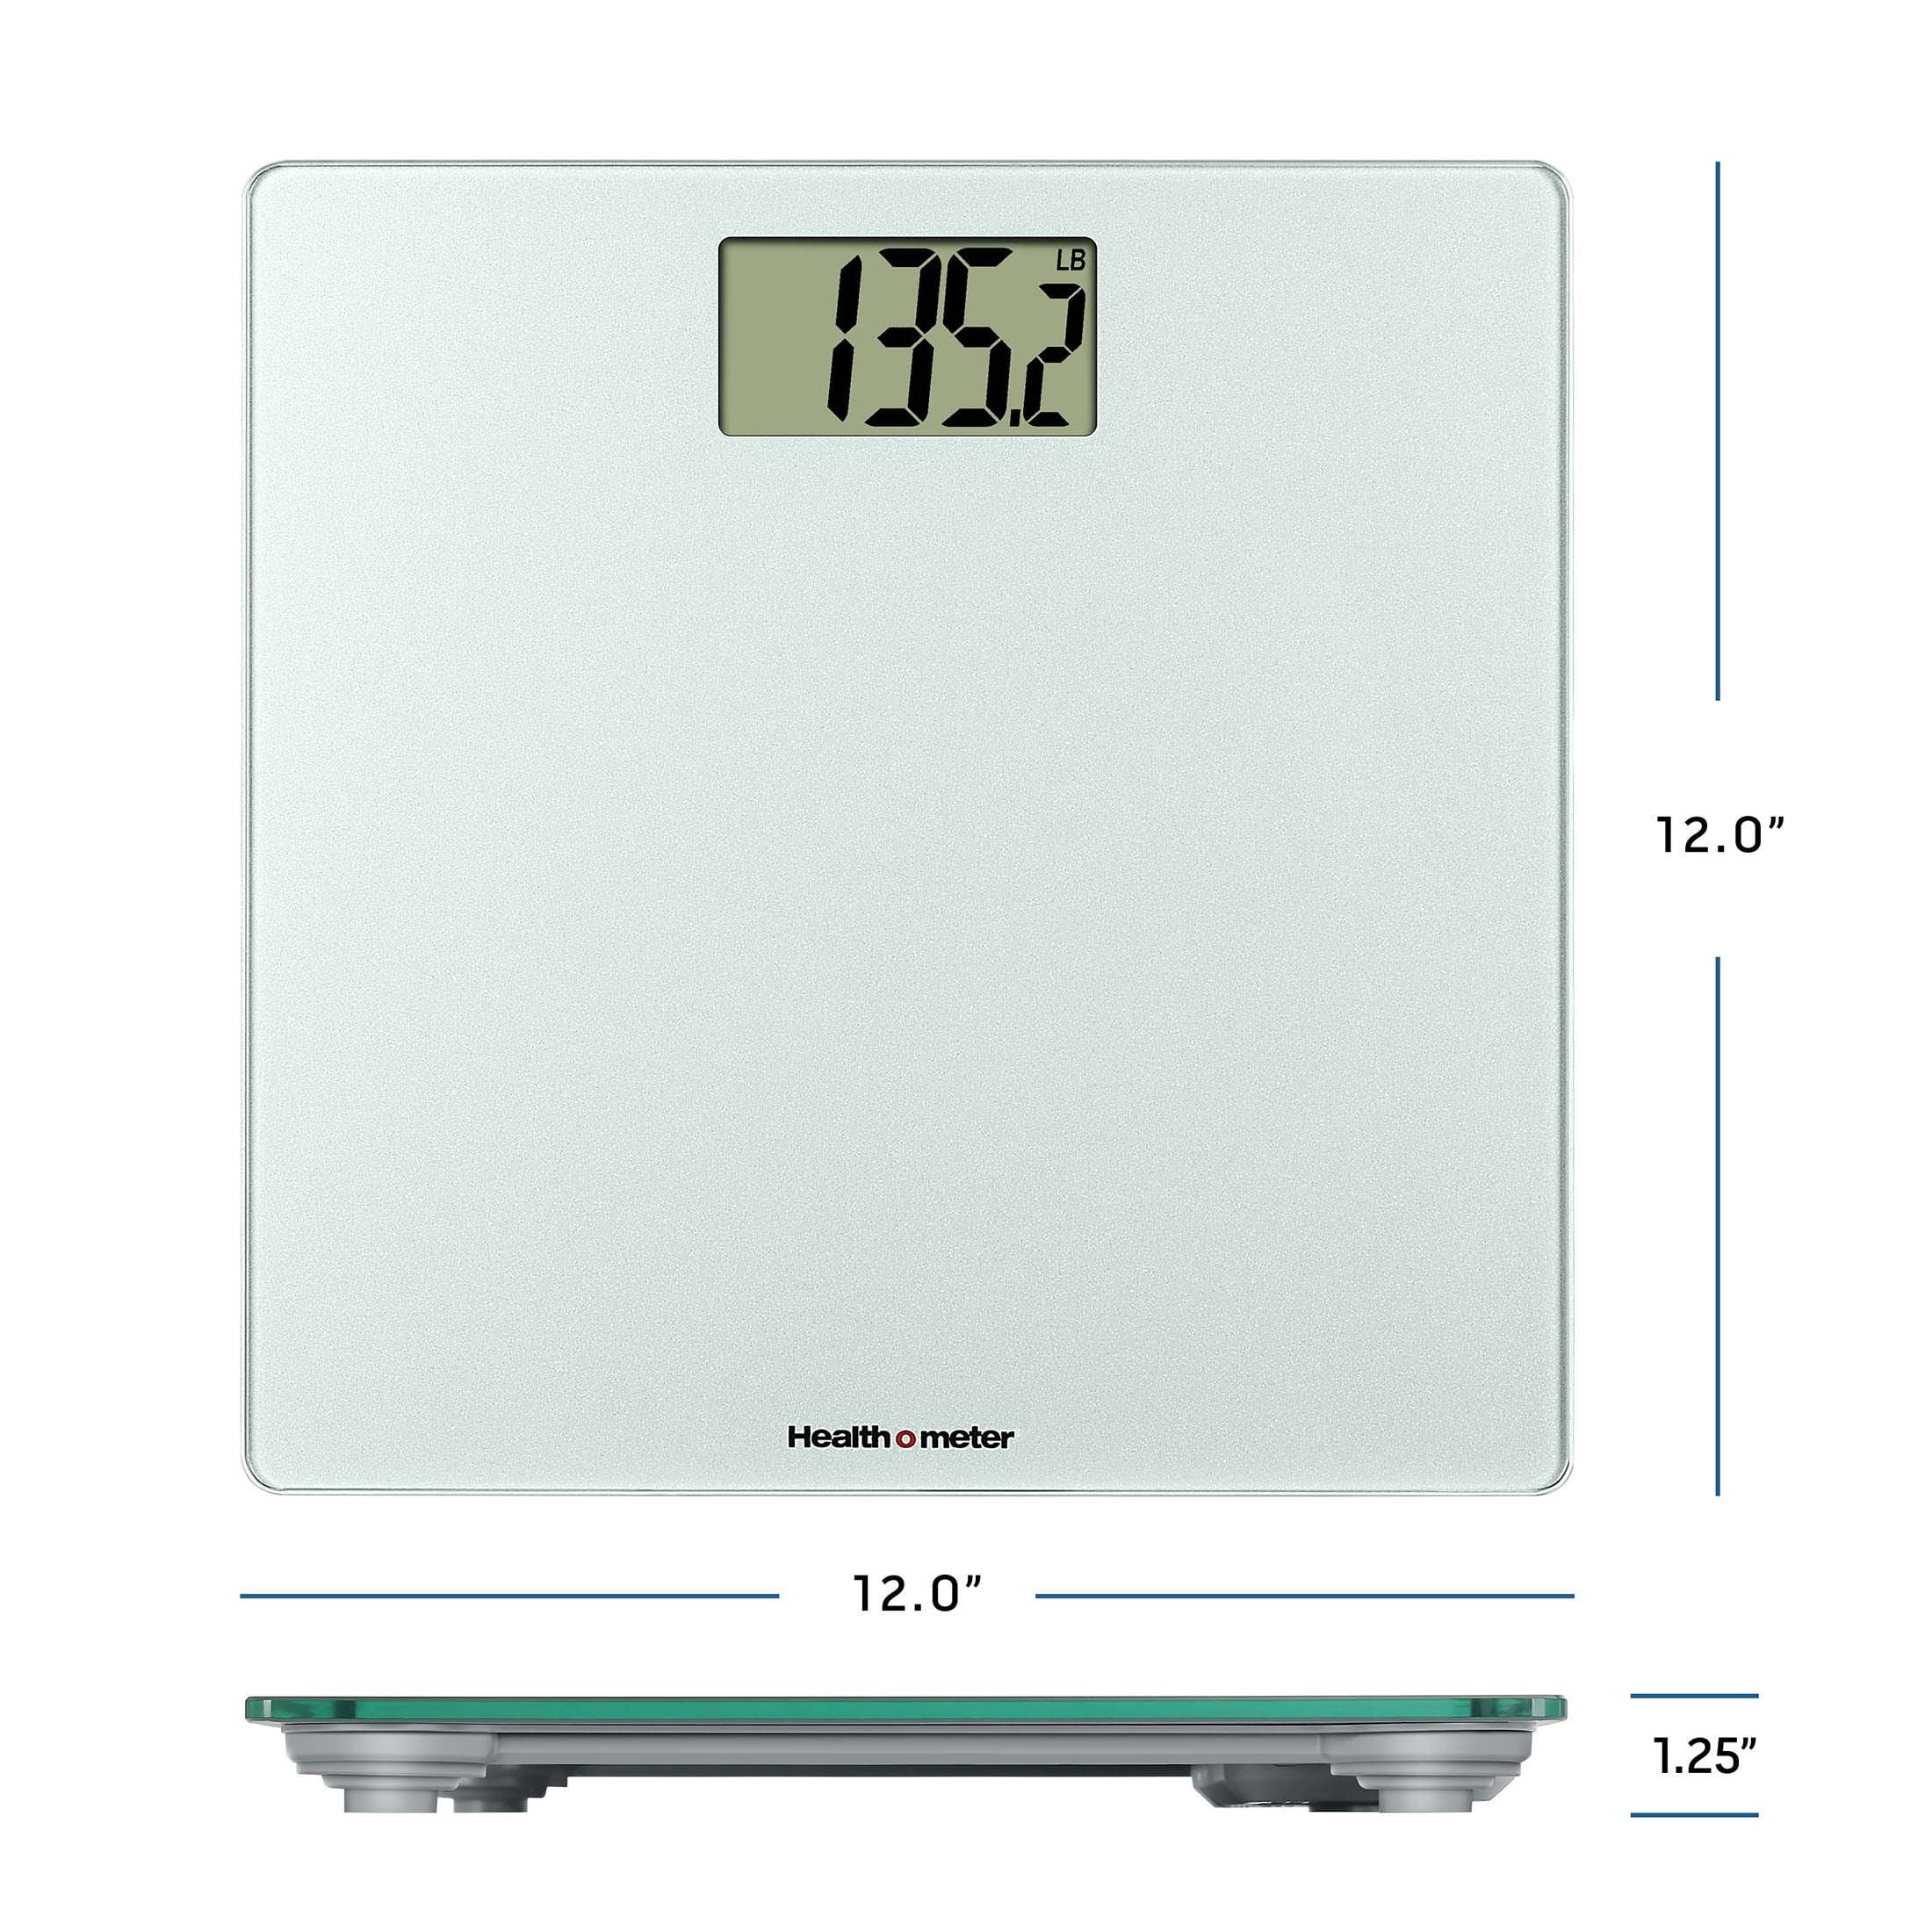 HN290T Digital Weight Scale Test Report OMRON HEALTHCARE